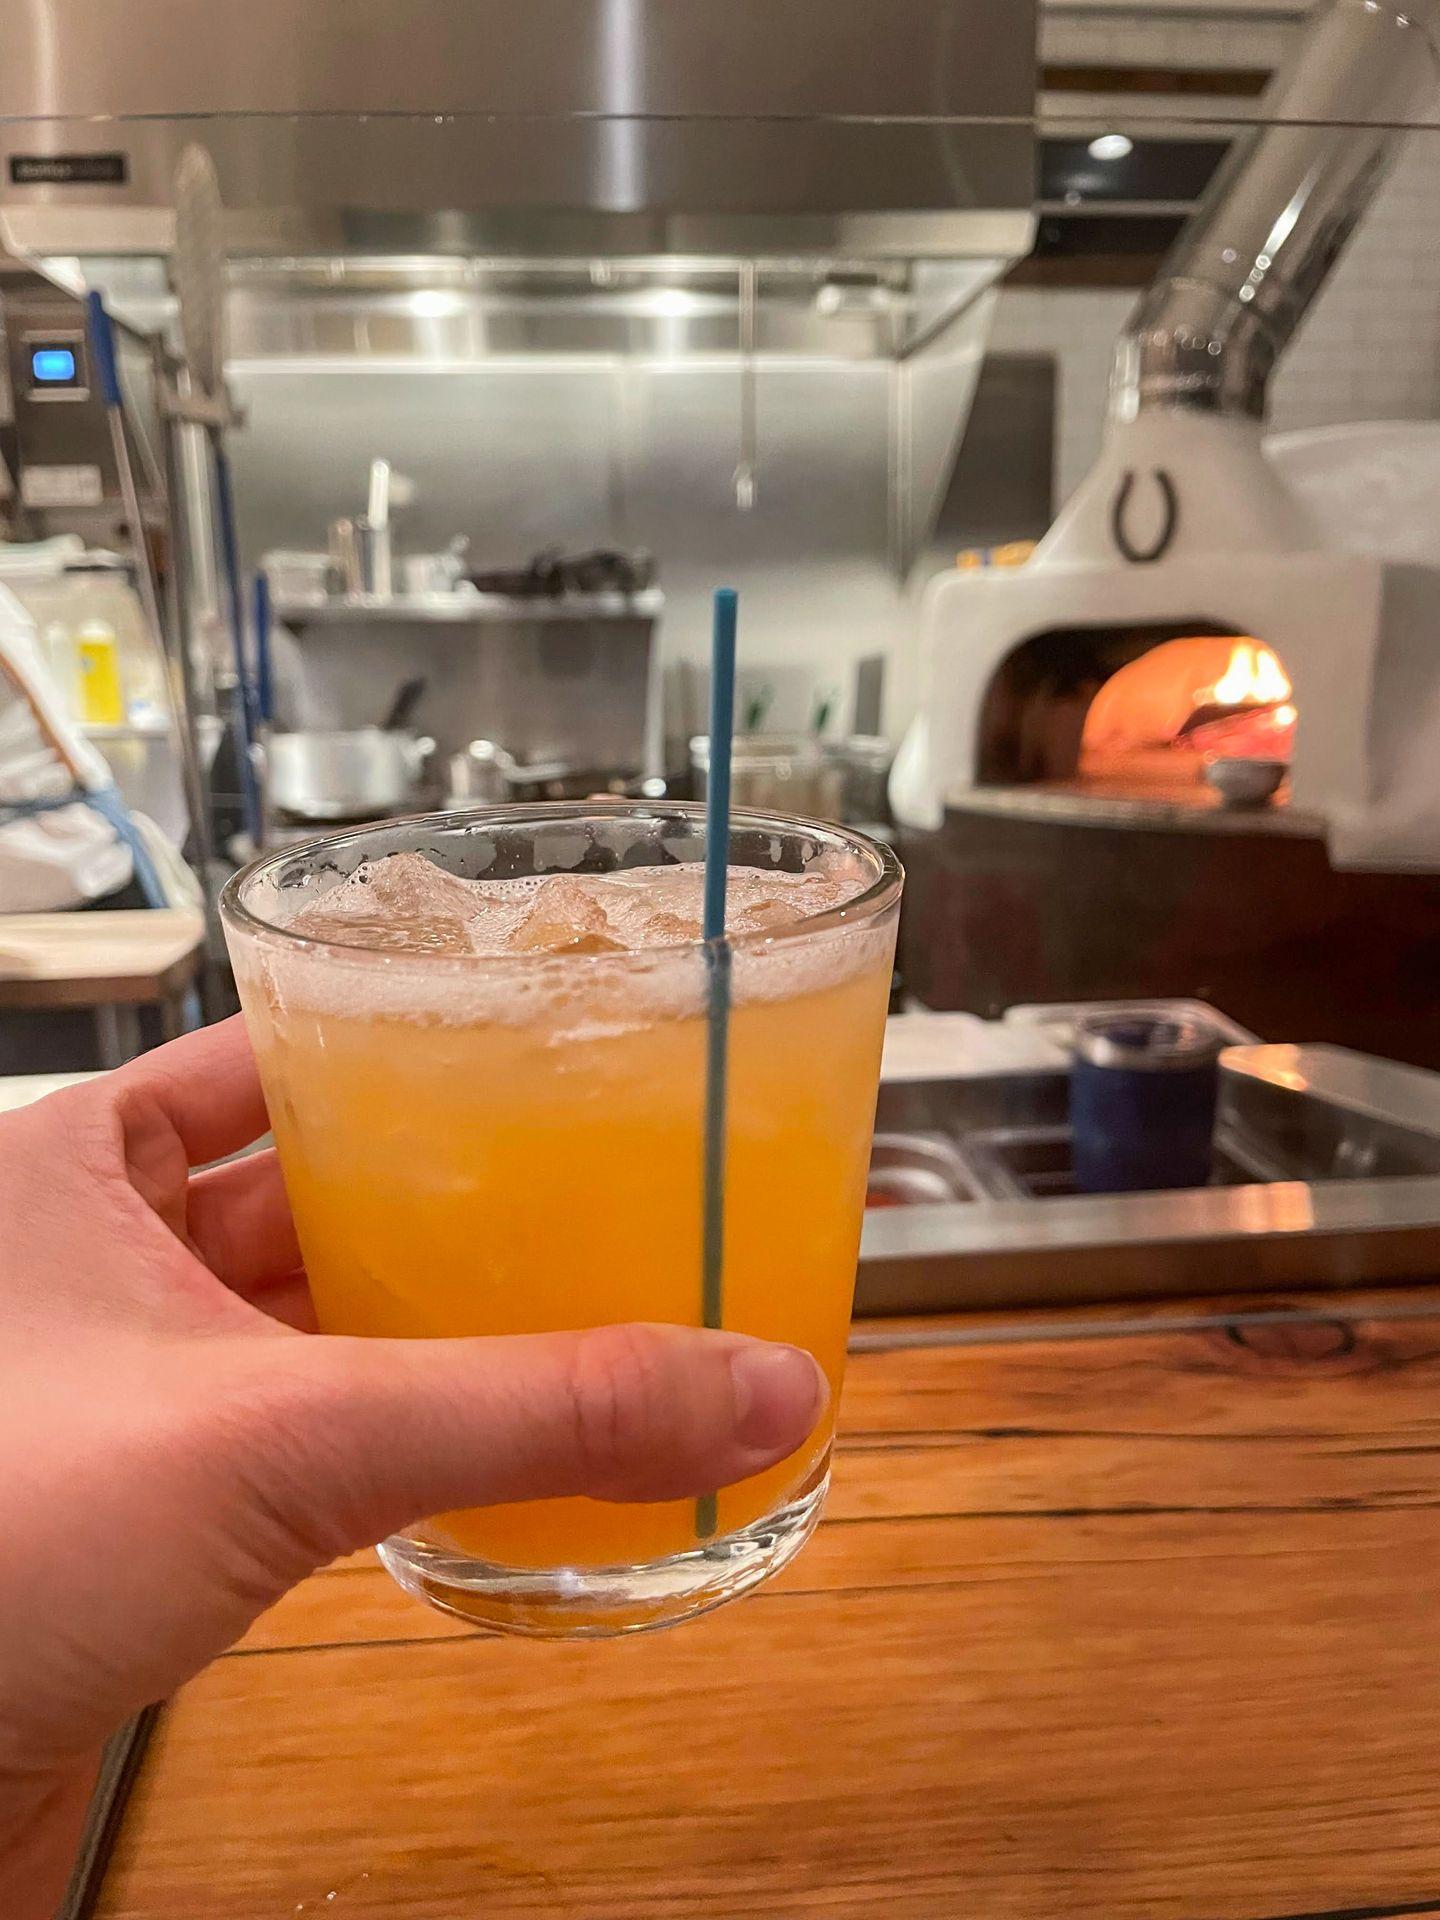 Holding up a cocktail with a wood-fired pizza oven in the background.